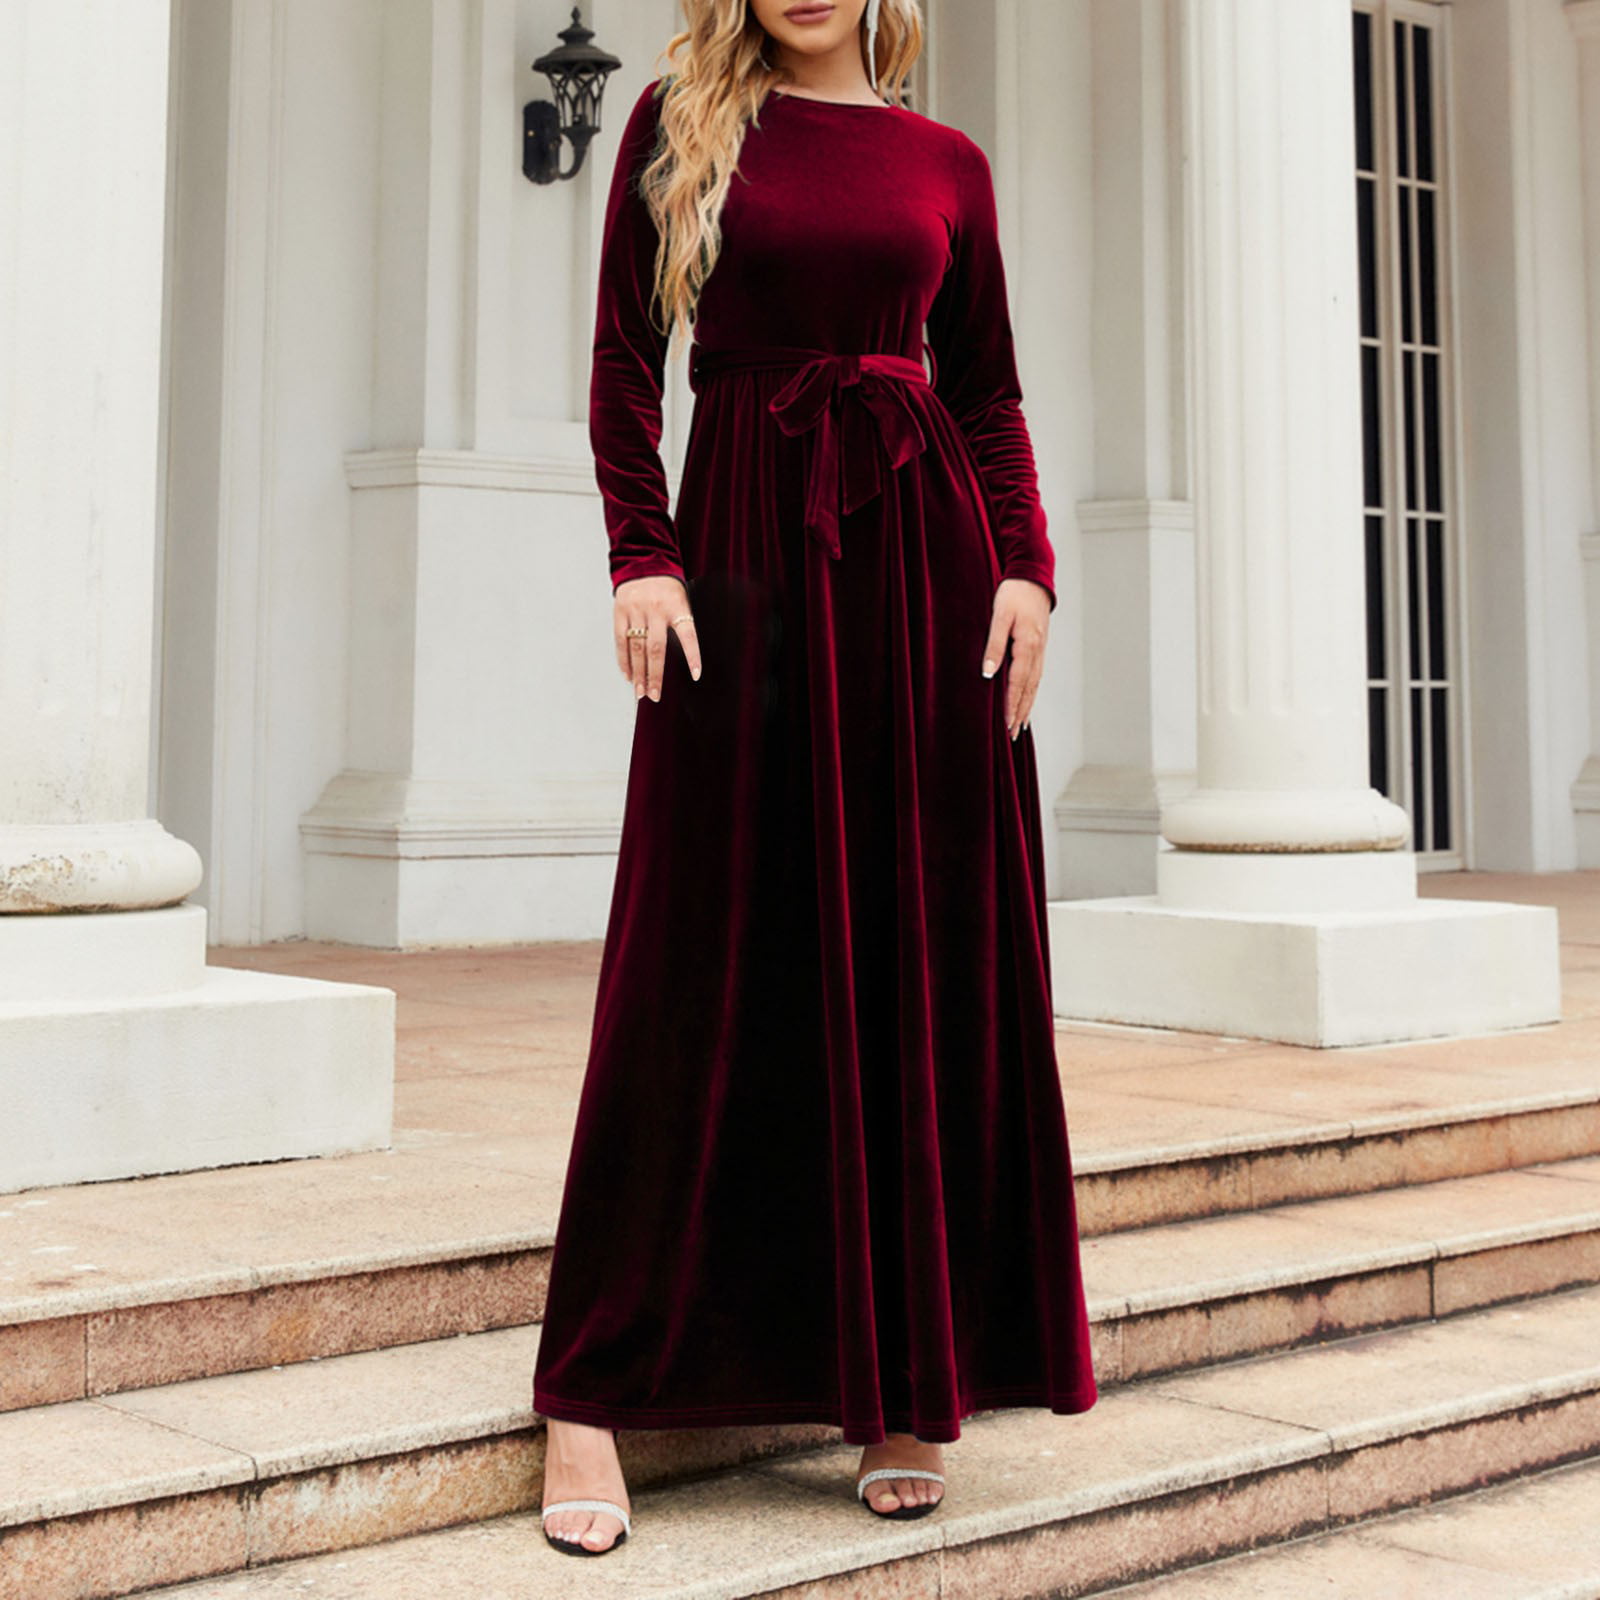 Red Gowns Online Shopping for Women at Low Prices